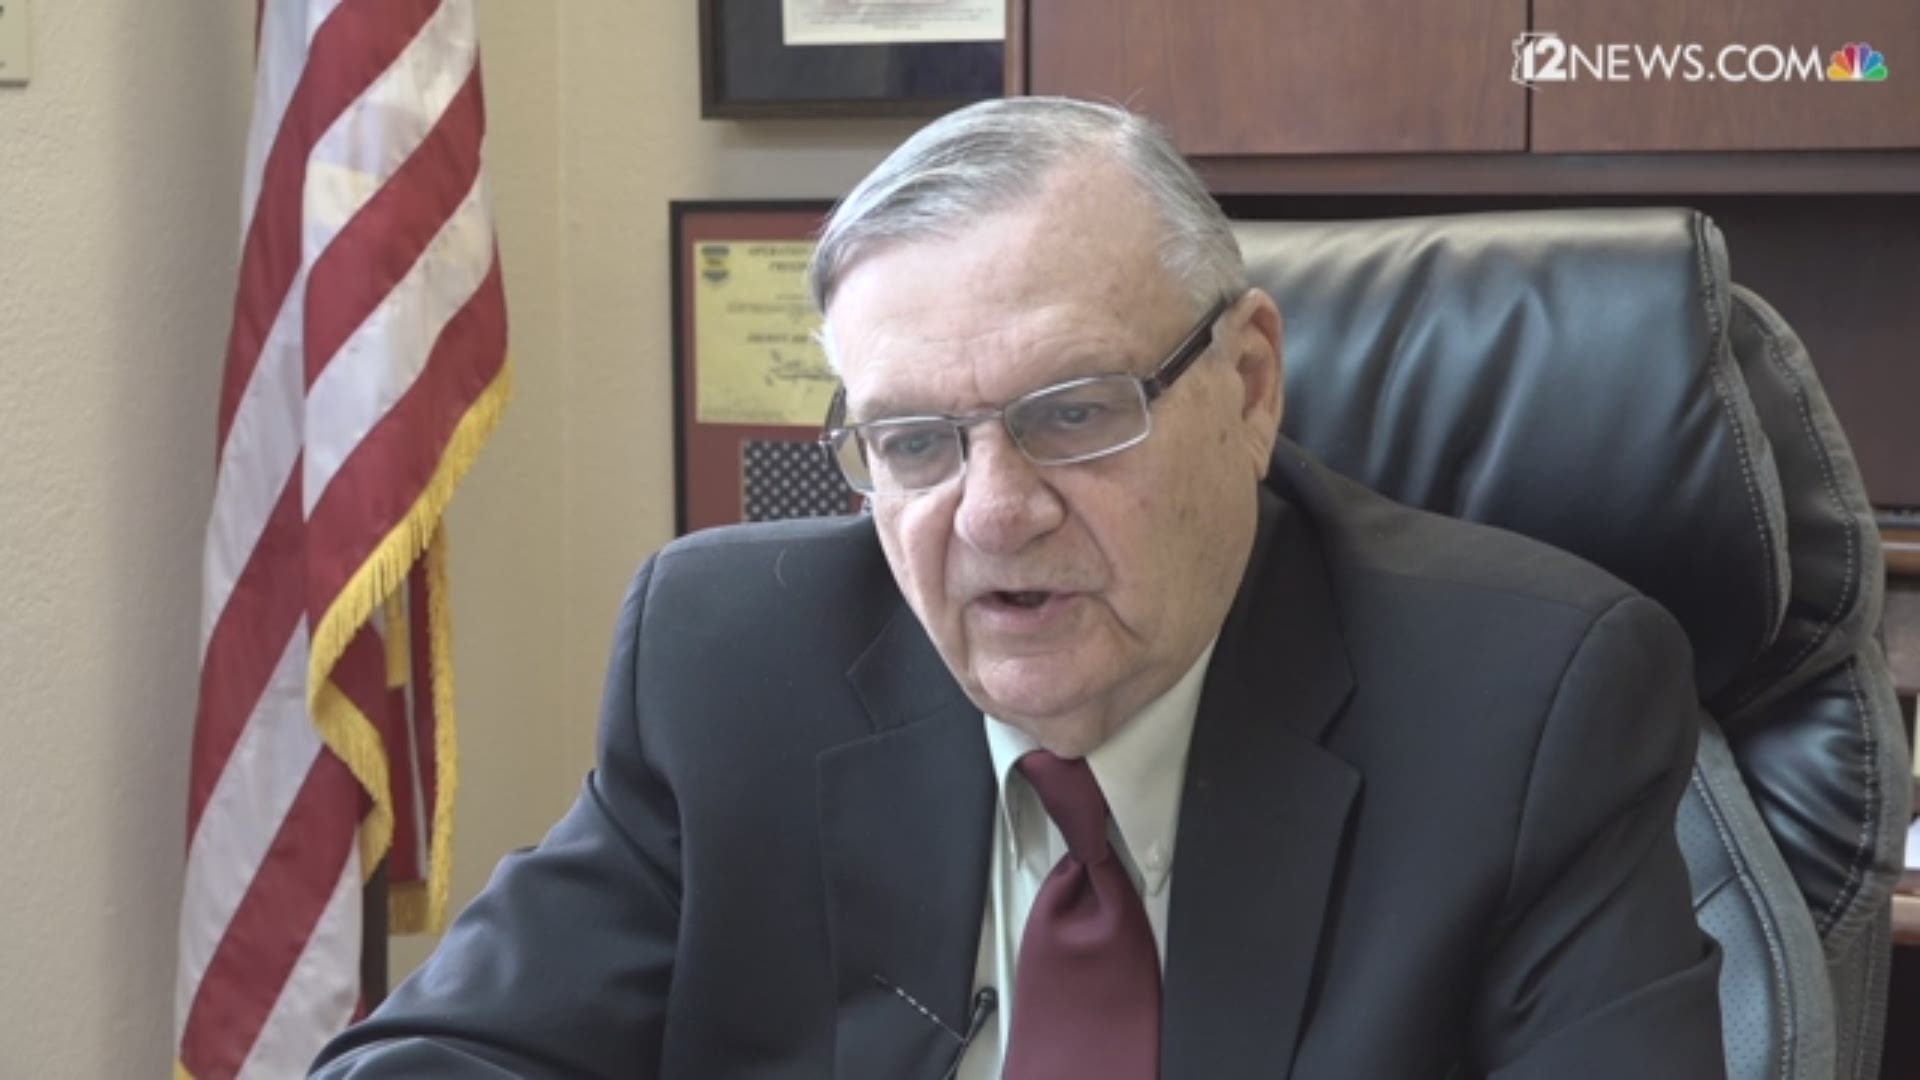 12 News reporter Antonia Mejia sat down with Joe Arpaio to discuss his announcement to run for the U.S. Senate.